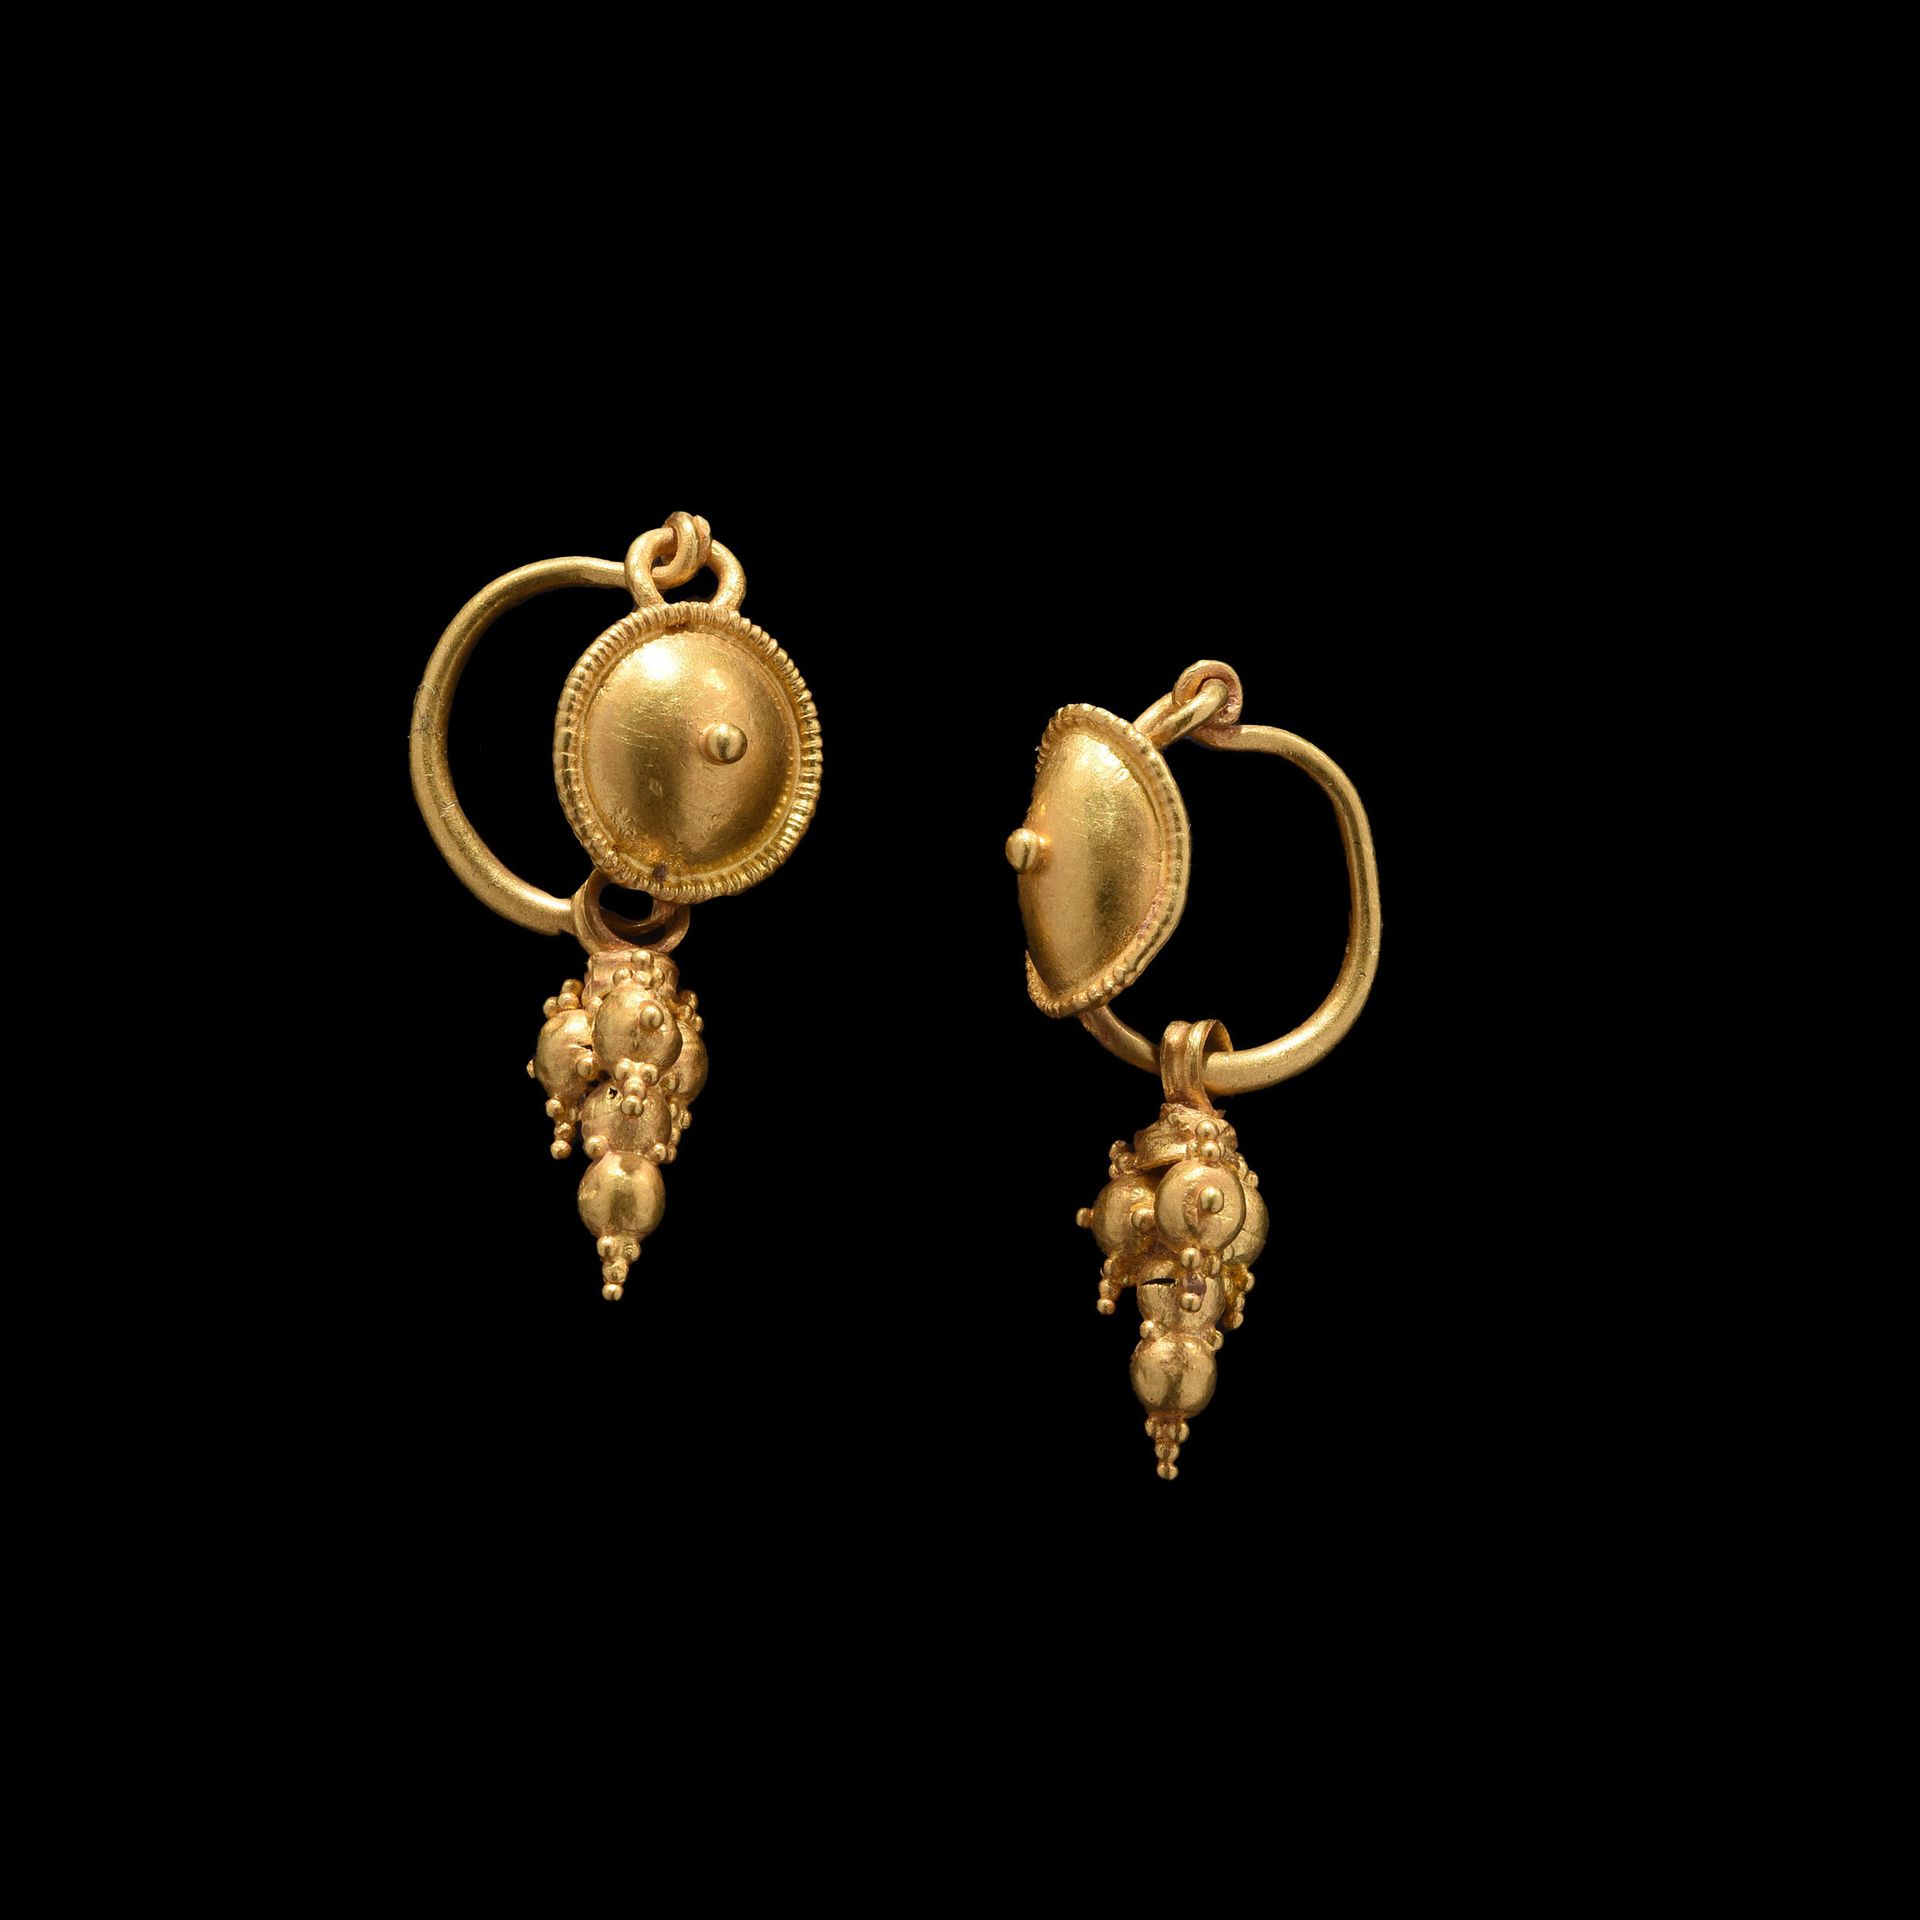 Null PAIR OF EARRINGS

Roman art, 1st century.

Gold discs and pendants with sph&hellip;